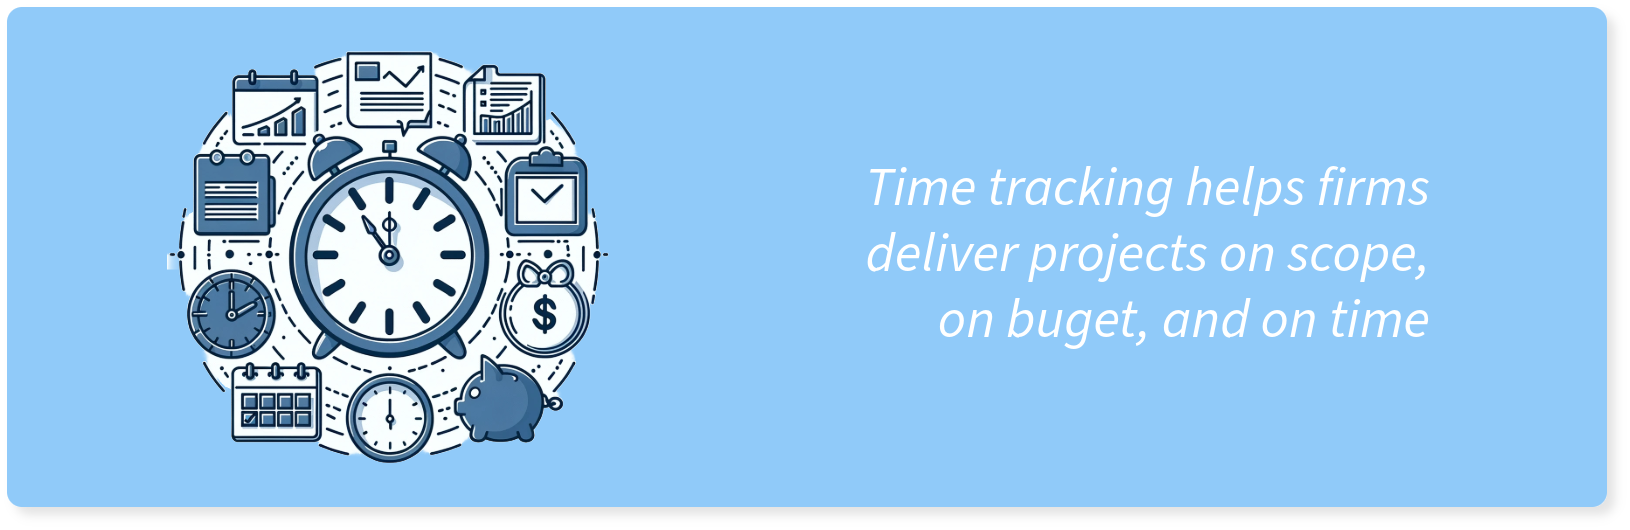 Time tracking helps firms deliver projects on scope, on budget, and on time.